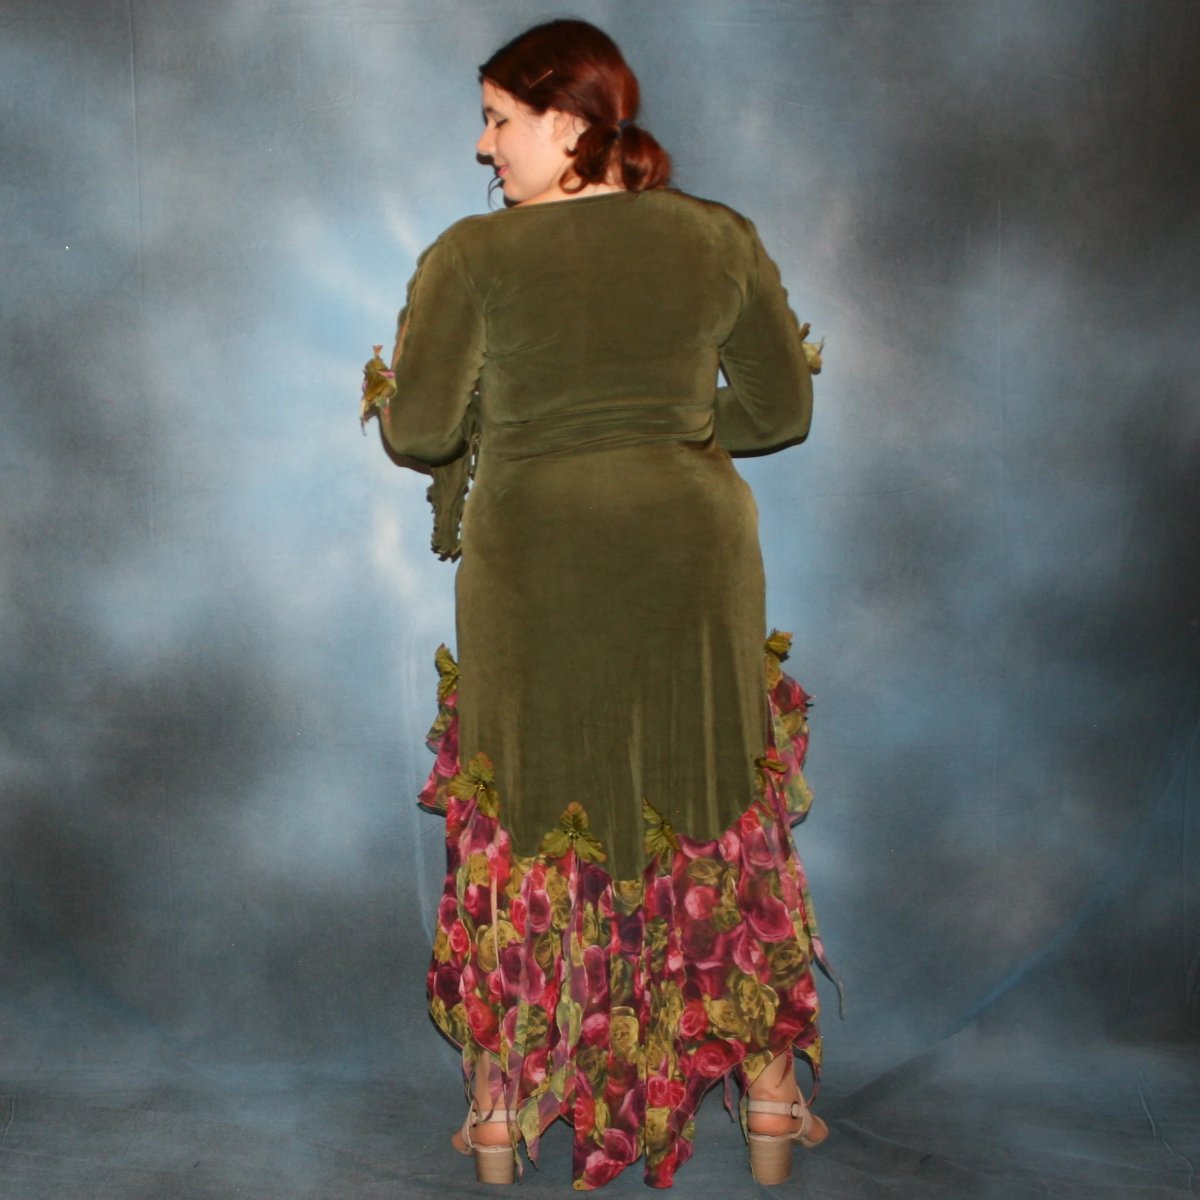 back view of Green ballroom social dance dress created in luxurious olive green solid slinky fabric with chiffon flounces of roses pattern in burgundies & deep pinks, embellished with silk leaves & a touch of Swarovski rhinestones.